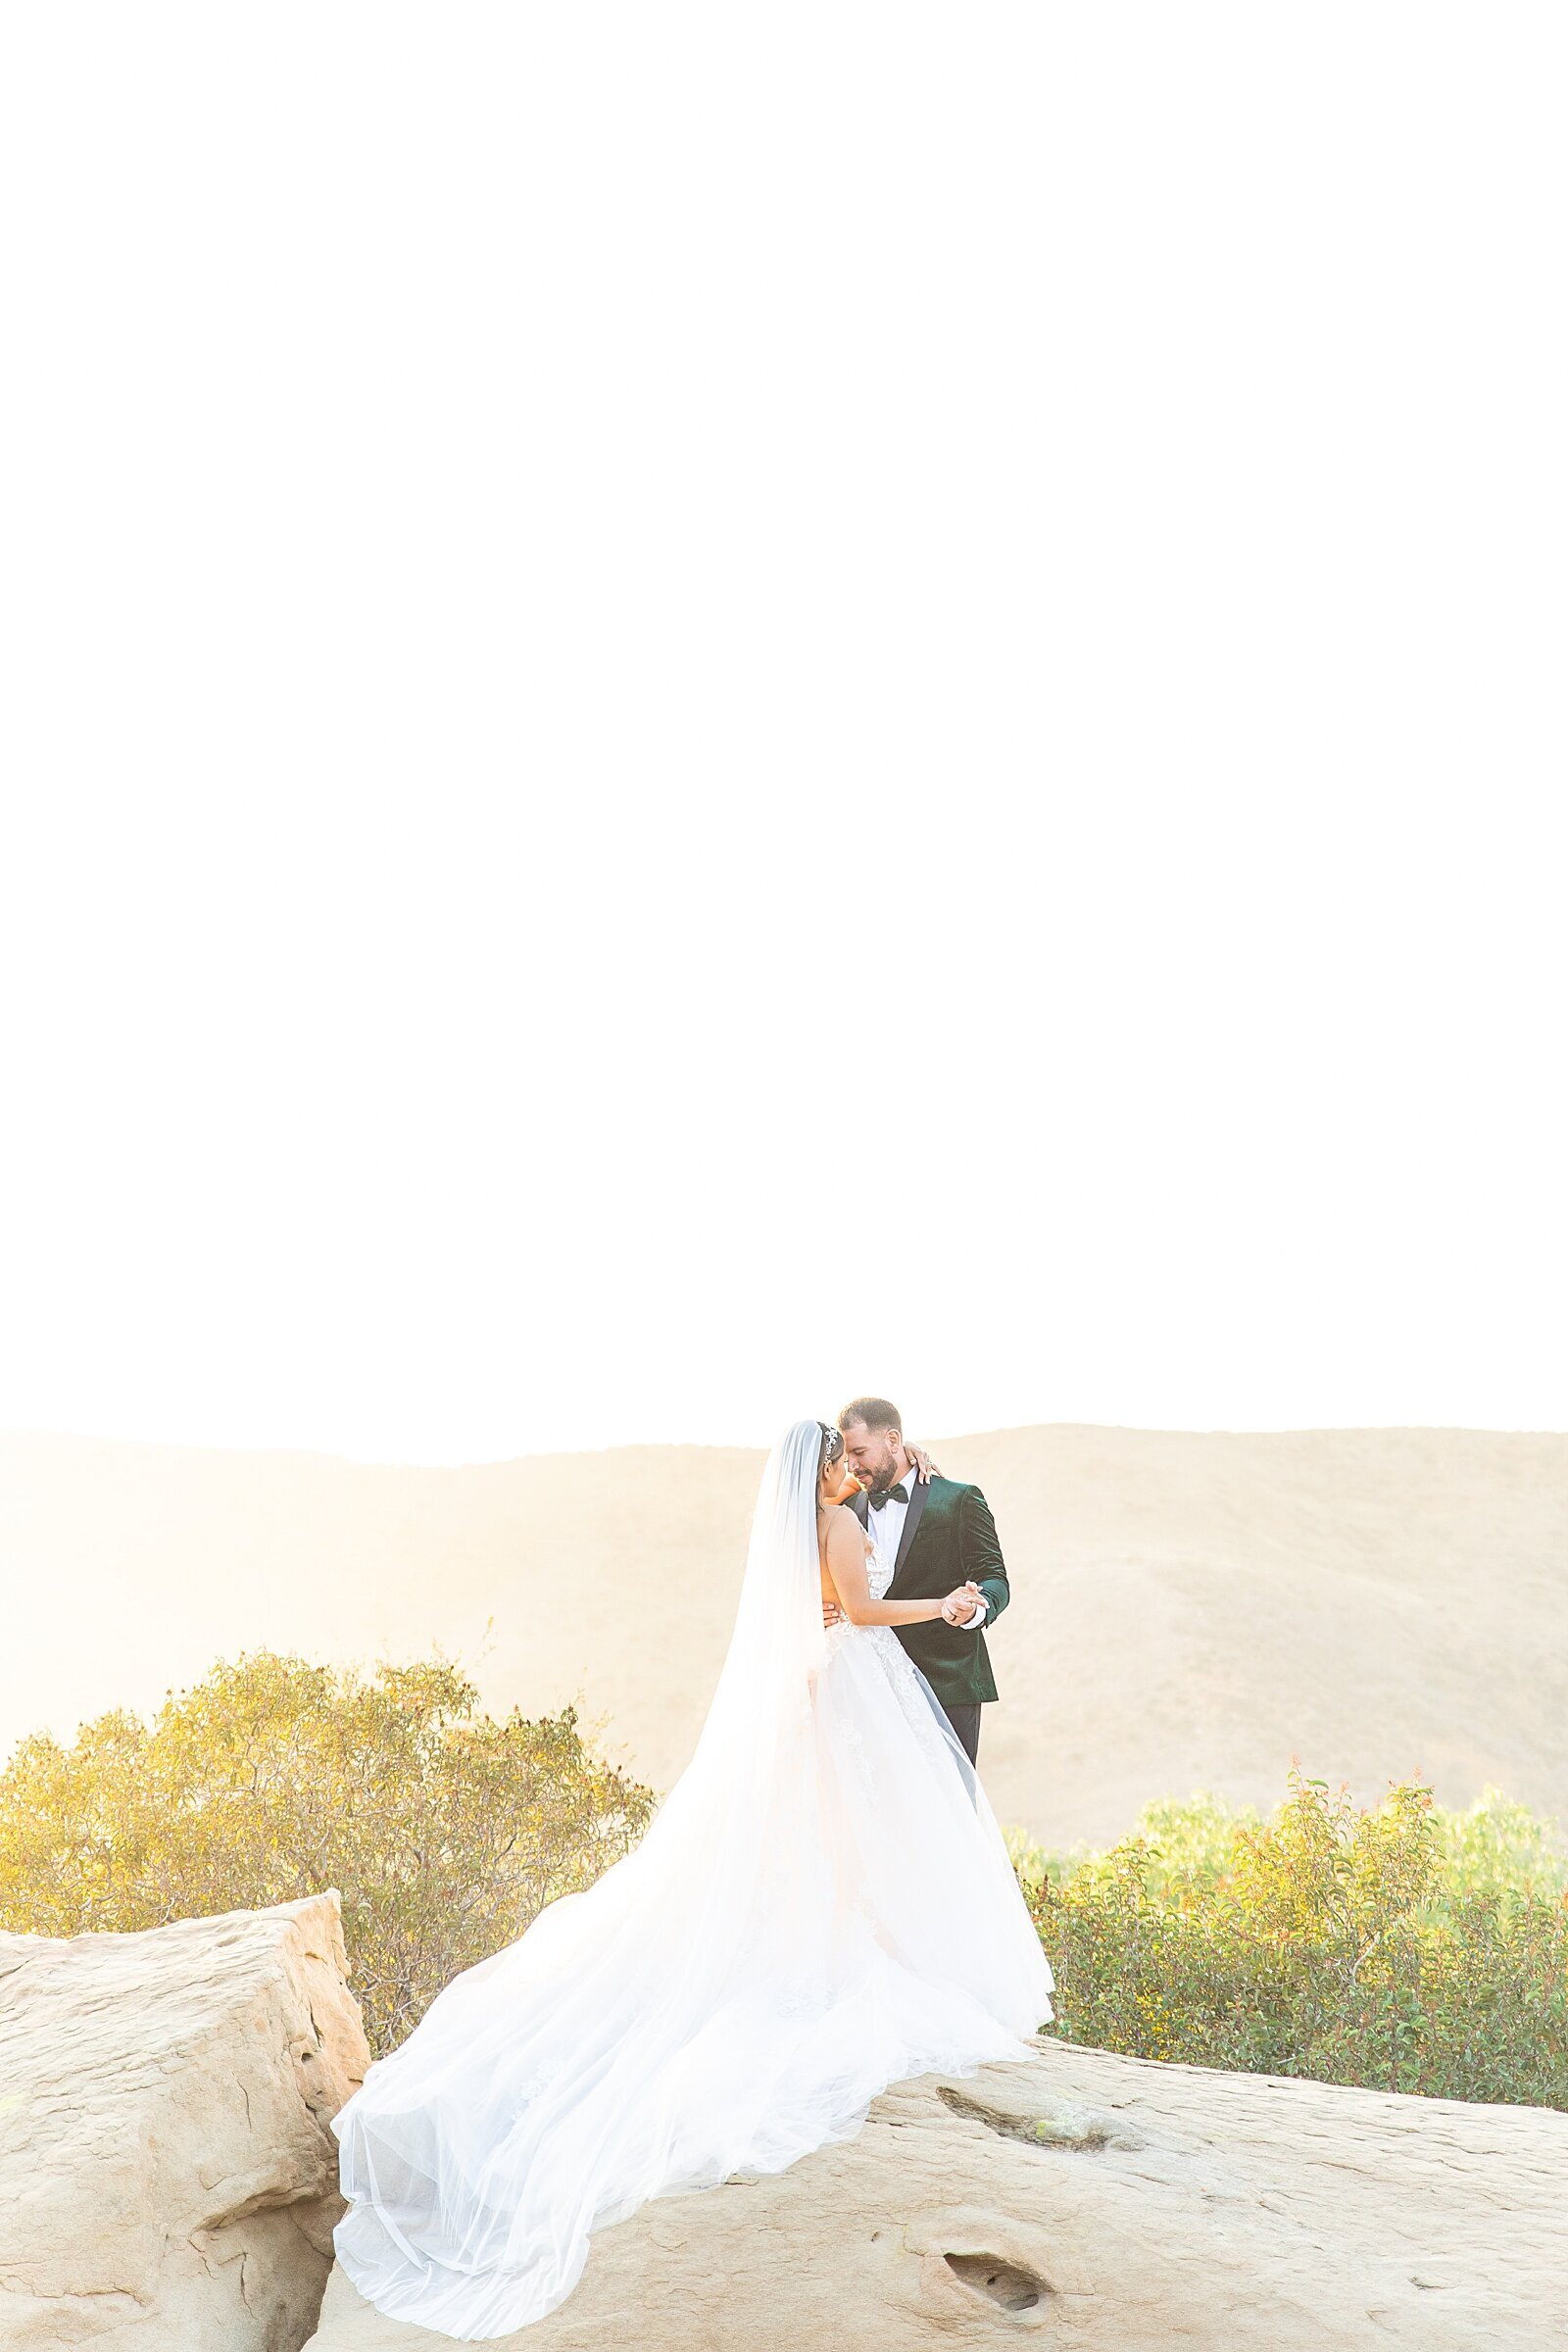 Bride and groom on a mountaintop in Los Angeles, California.